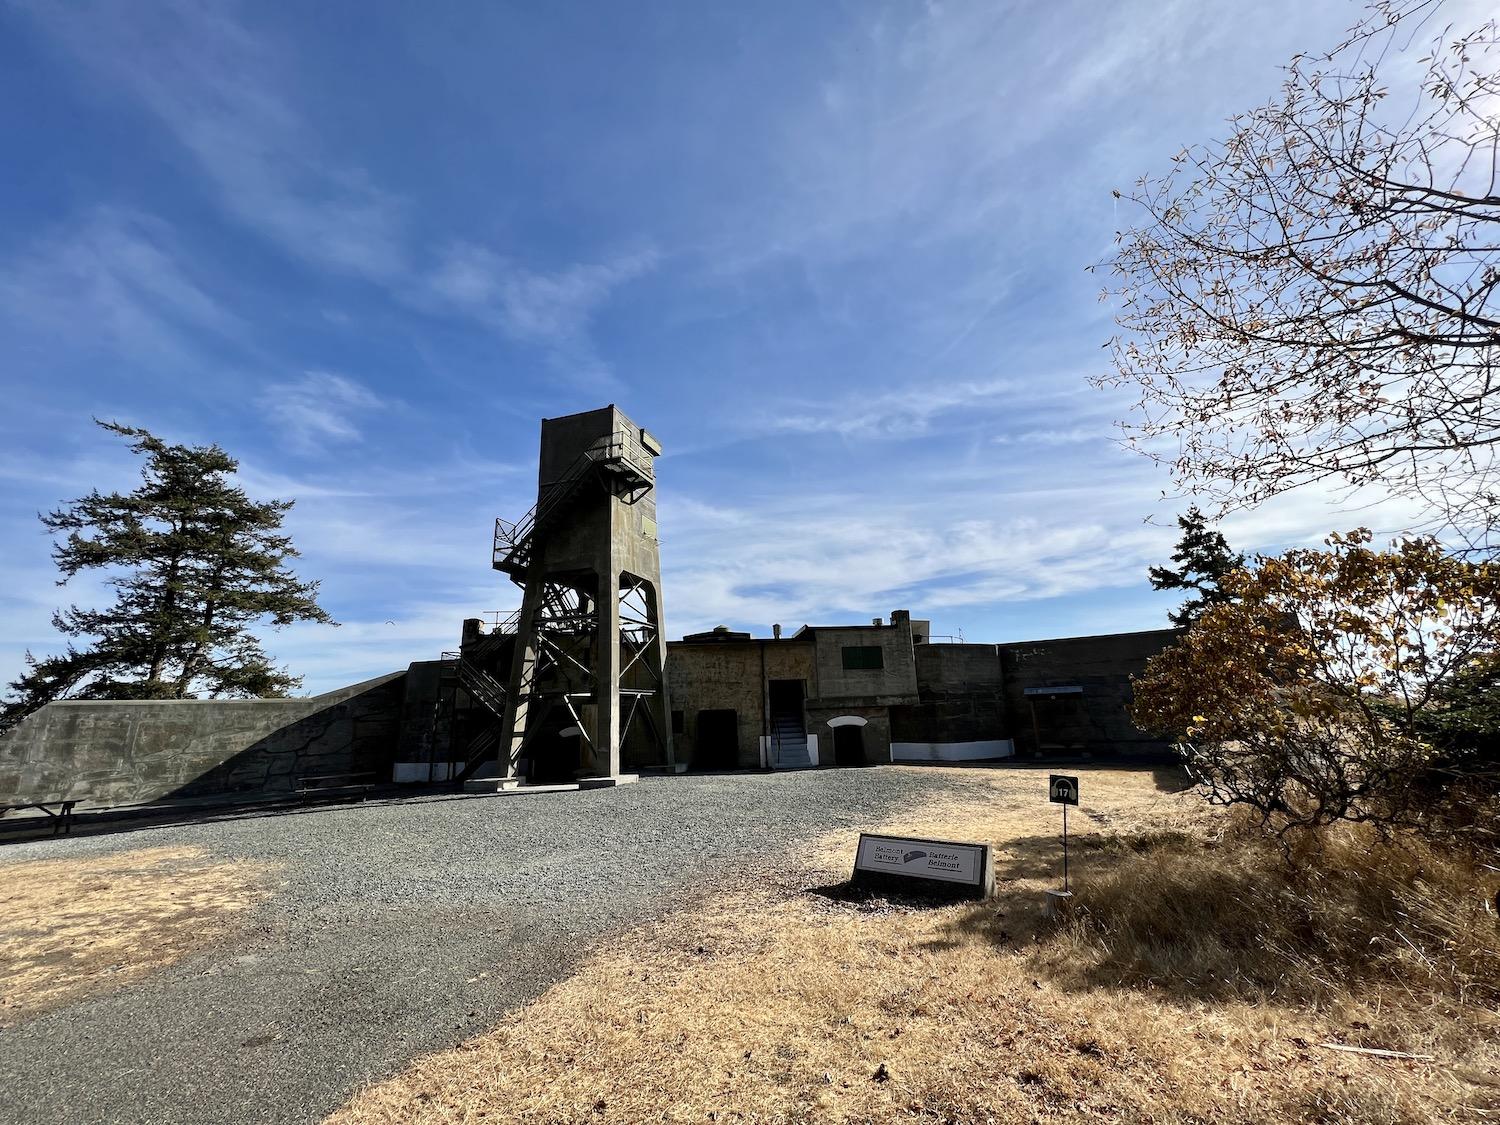 Military buffs will love exploring the batteries at Fort Rodd Hill.